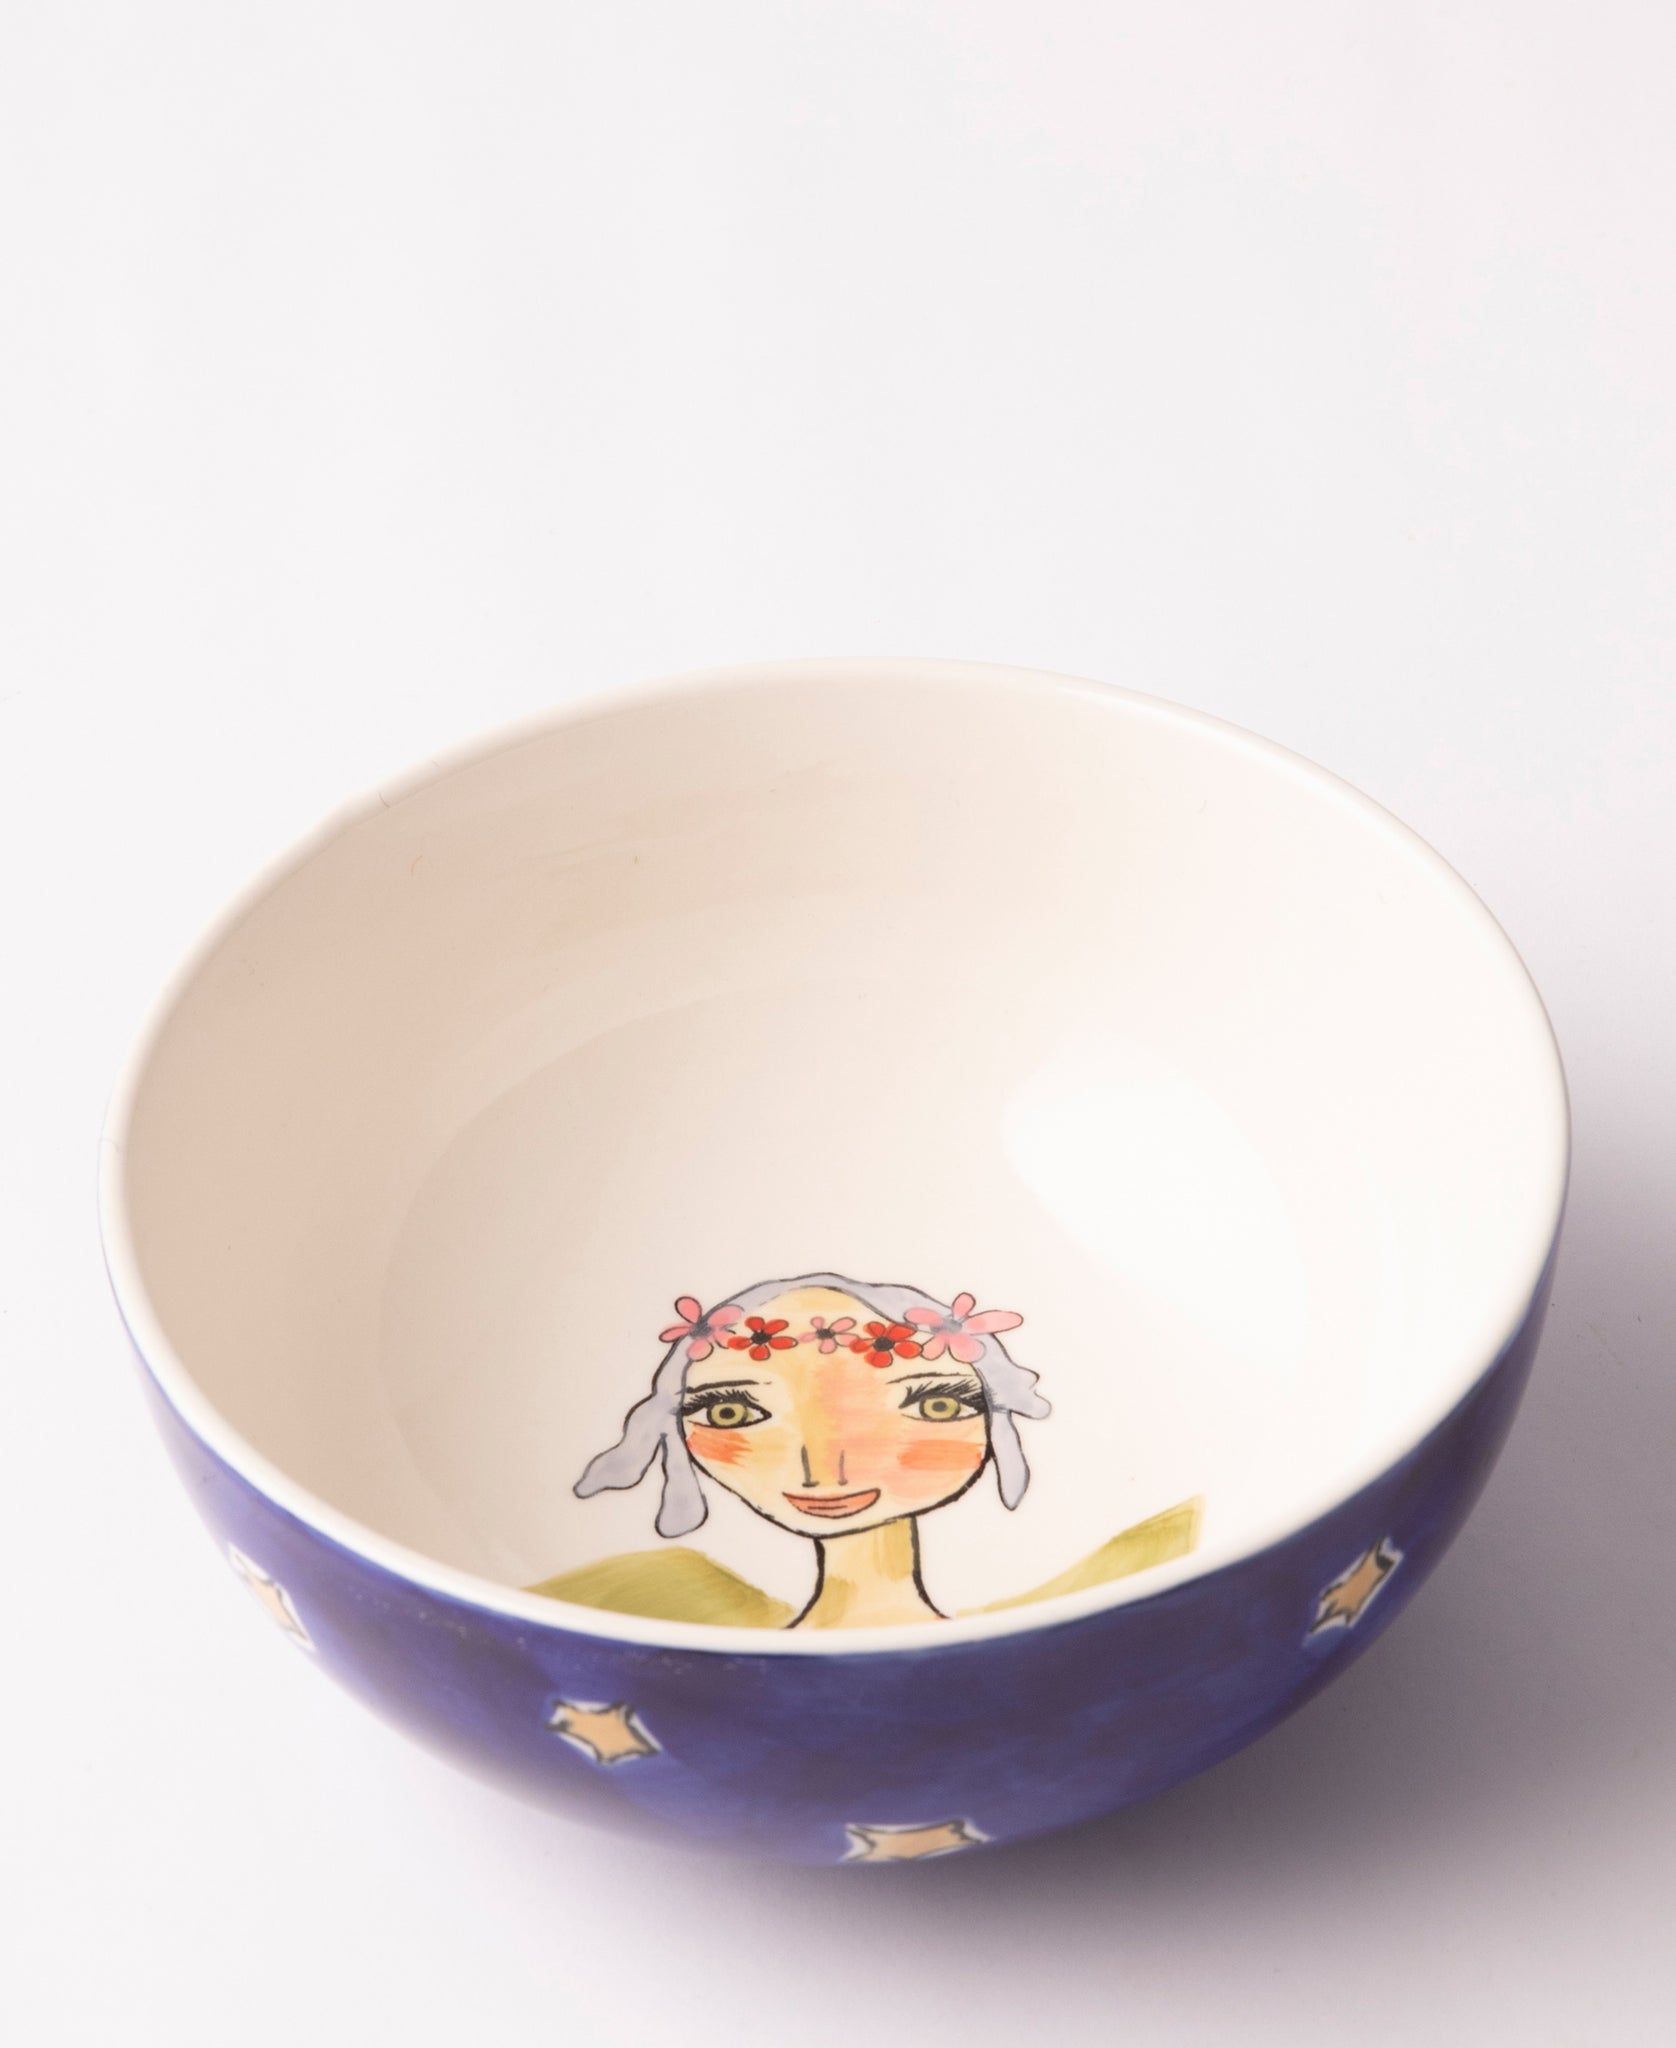 Olivia Live Your Dreams Cereal Bowl - Blue & White